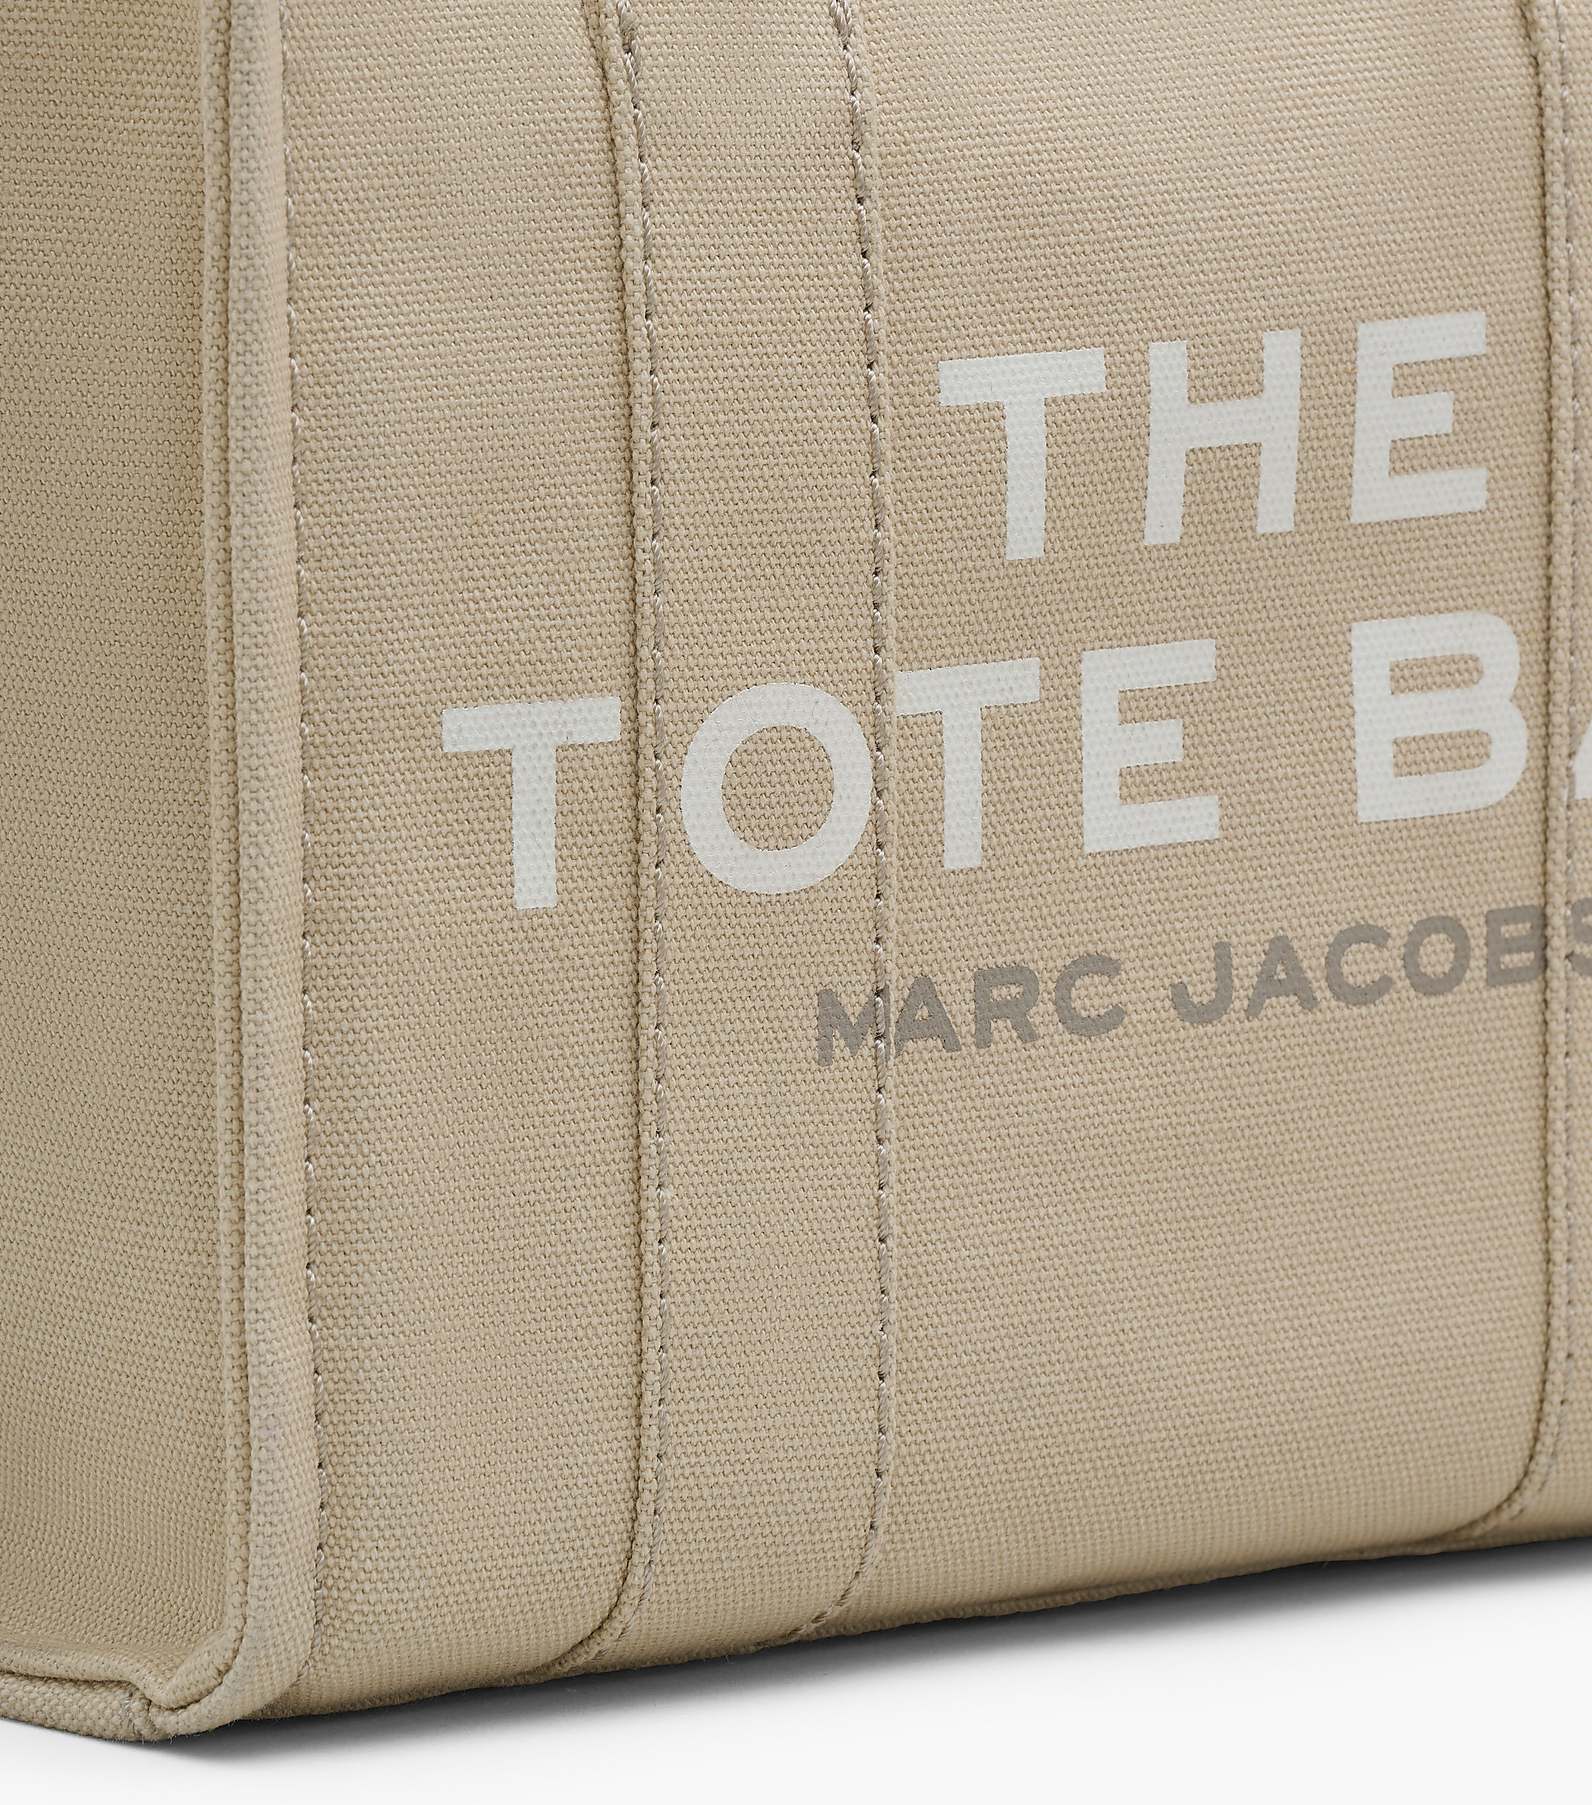 The Mini Tote Bag | Marc Jacobs | Official Site